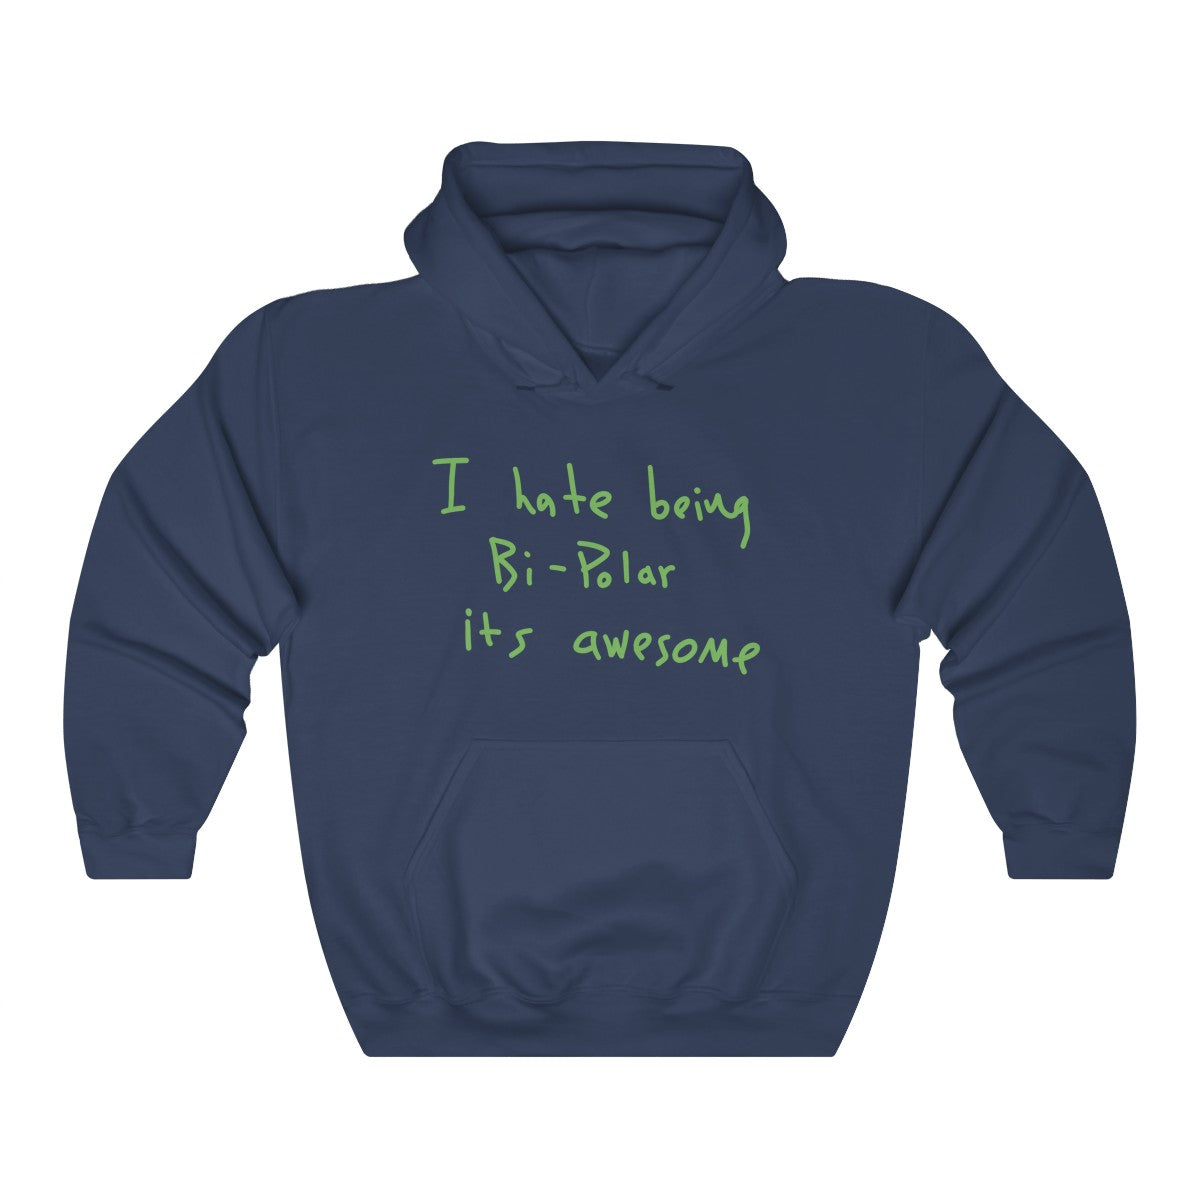 I hate being Bi-Polar it's awesome Kanye West inspired Heavy Blend™ Hoodie-Navy-S-Archethype